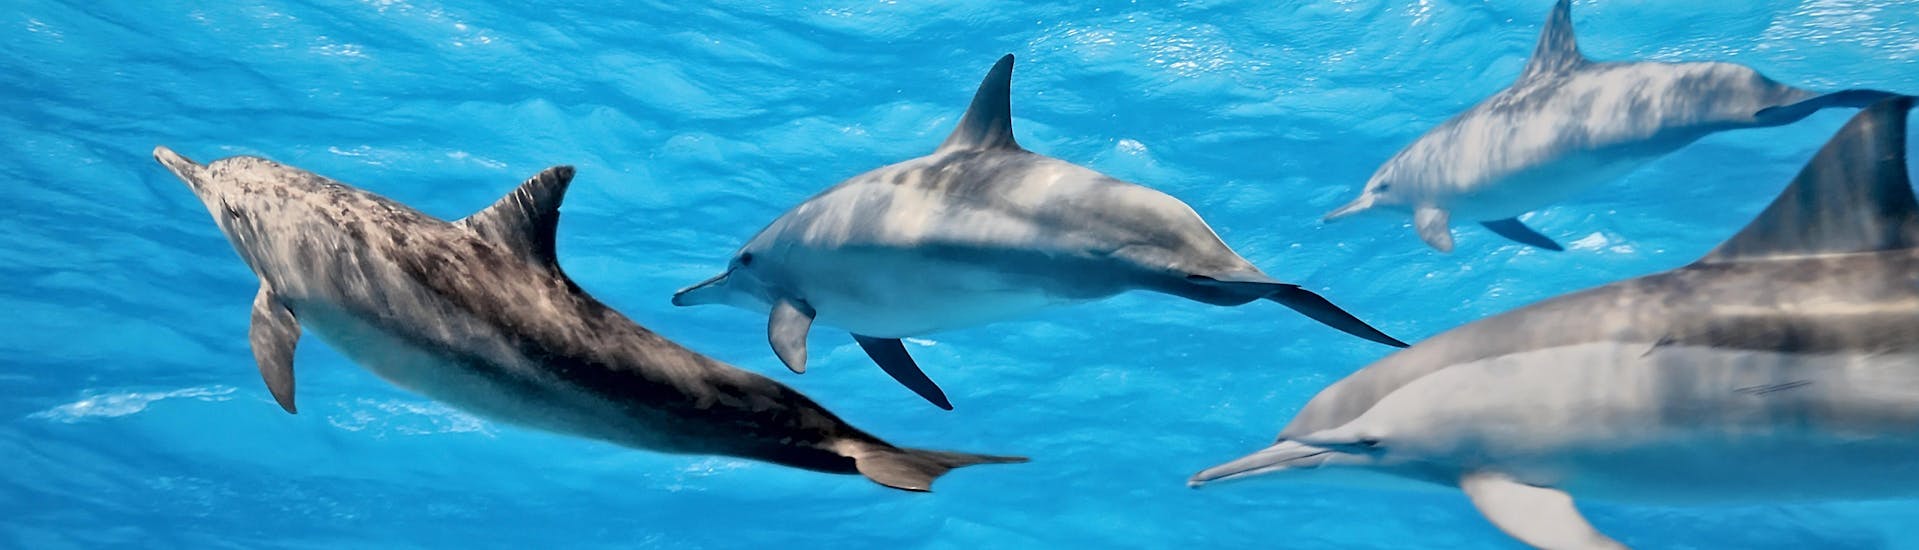 Watch dolphins swimming during your boat trip and see them jump